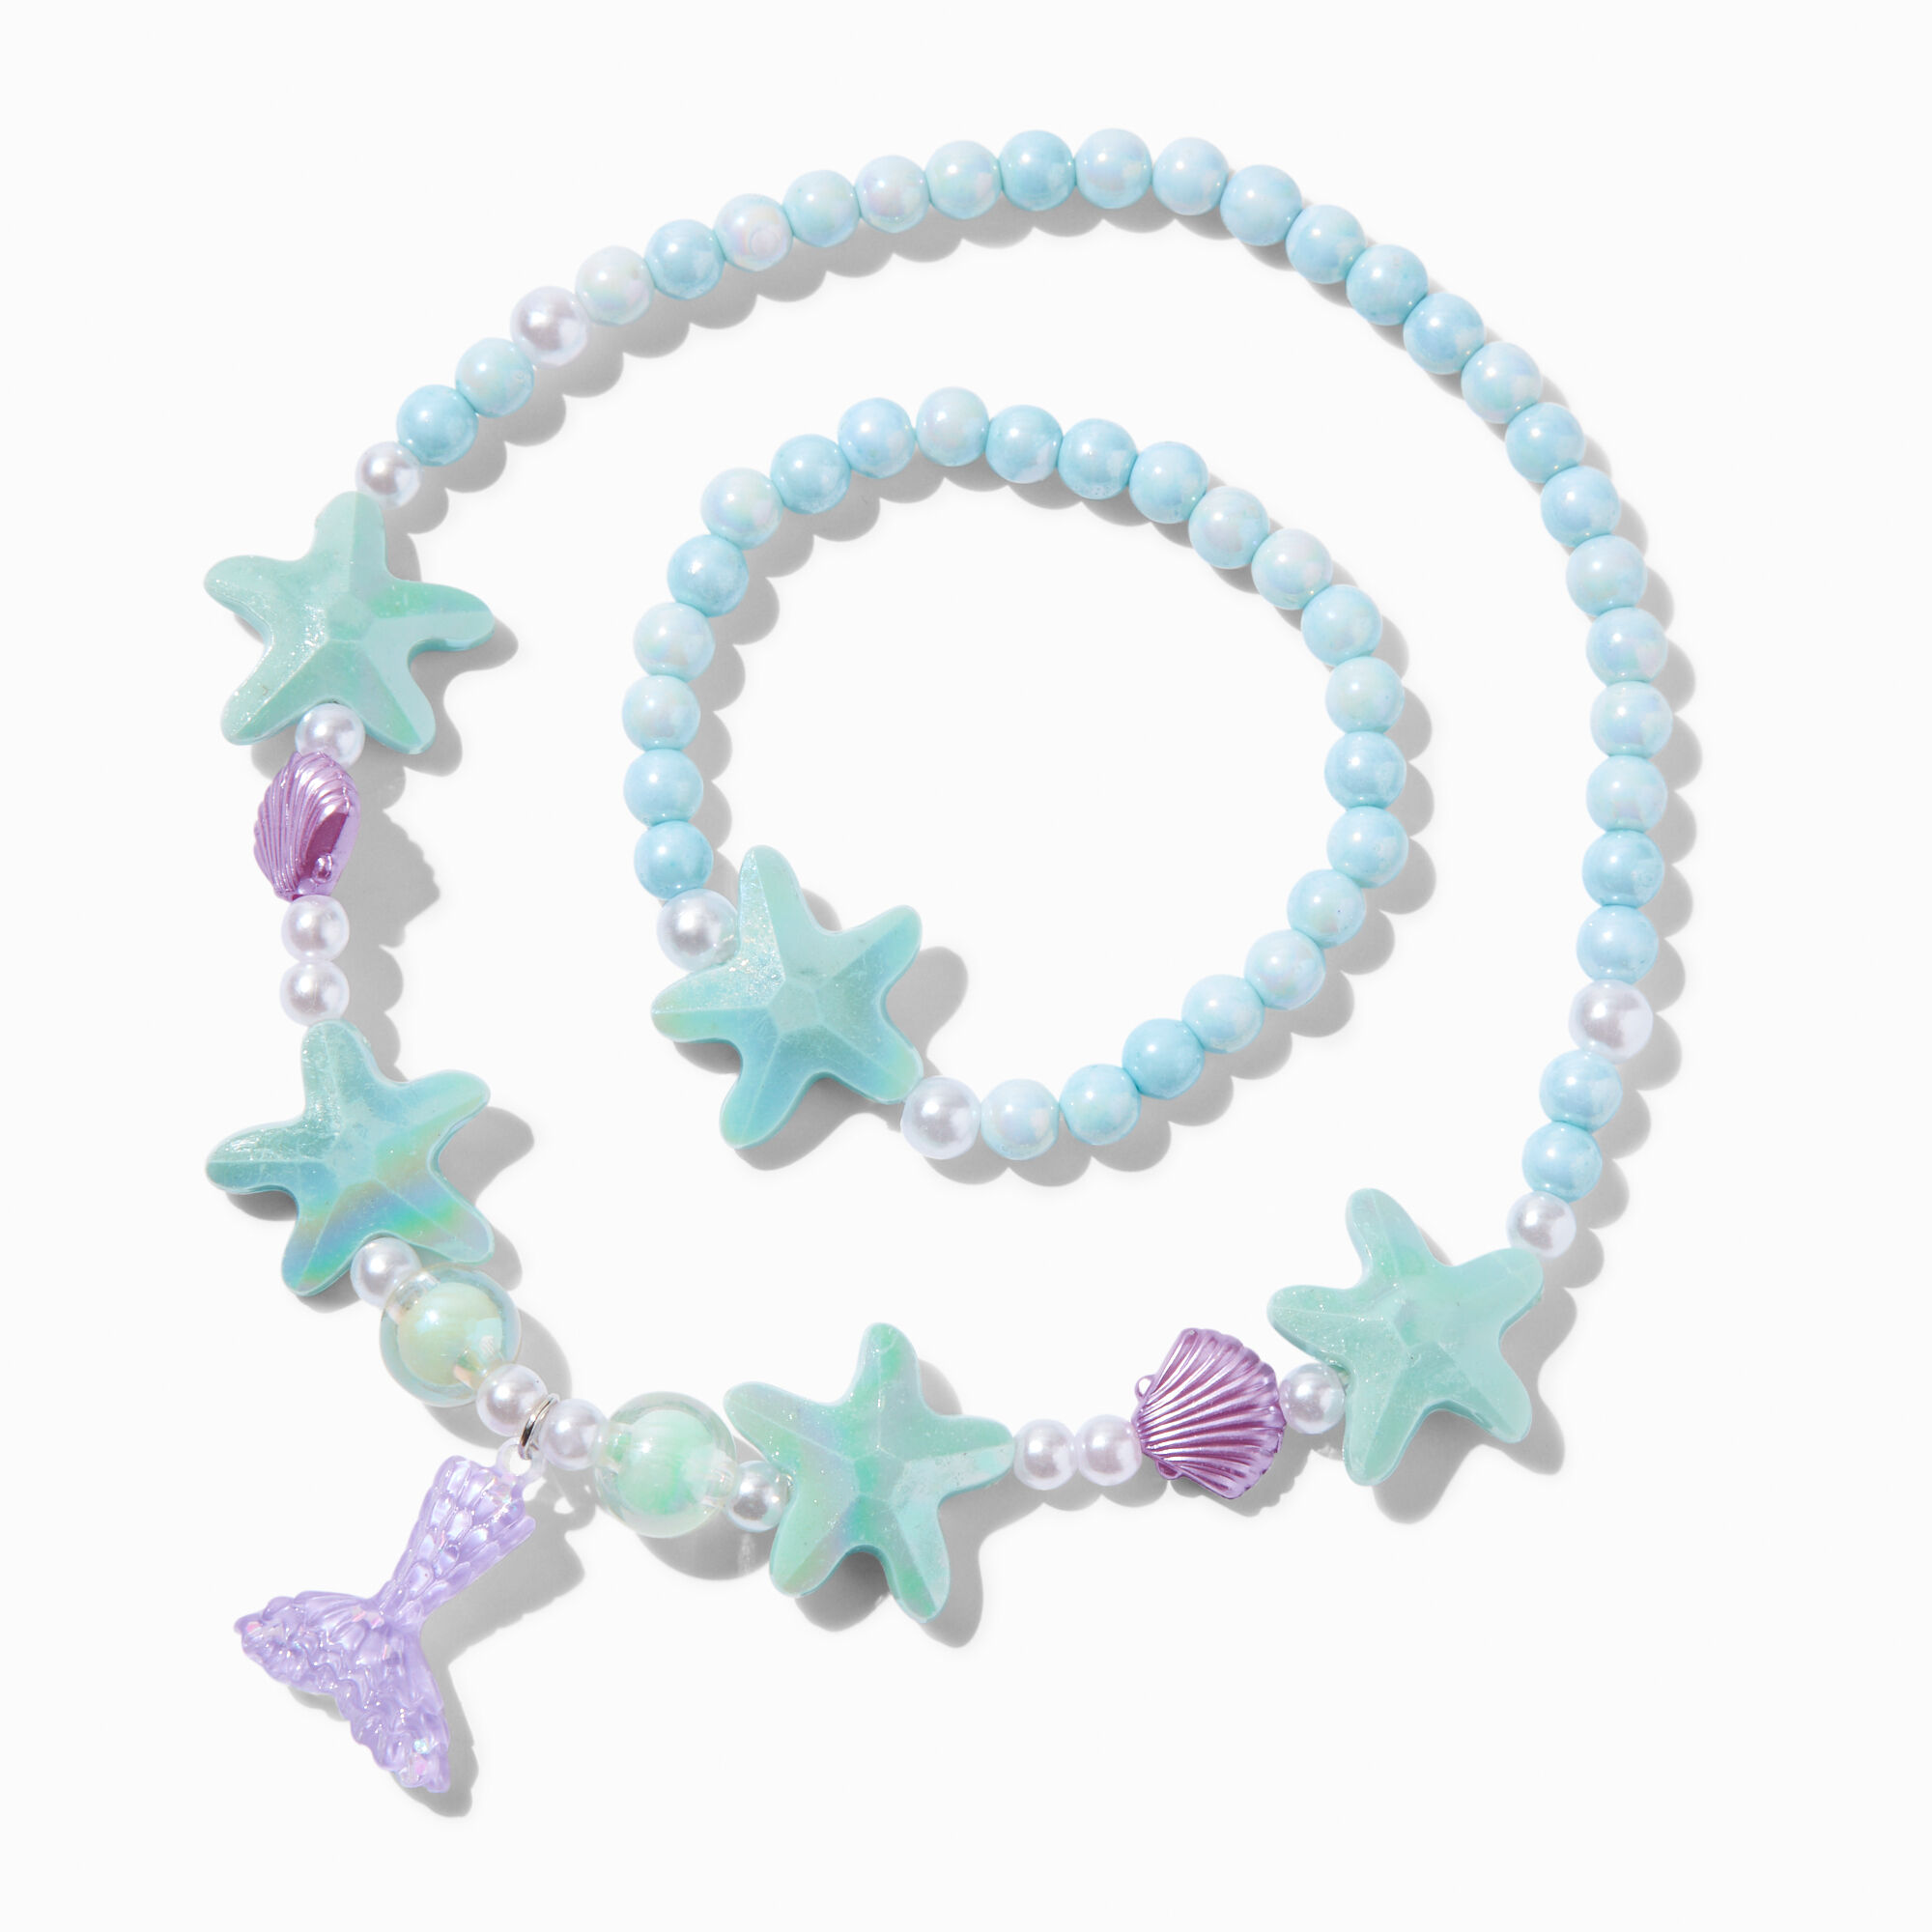 View Claires Club Mermaid Jewelry Set 2 Pack information